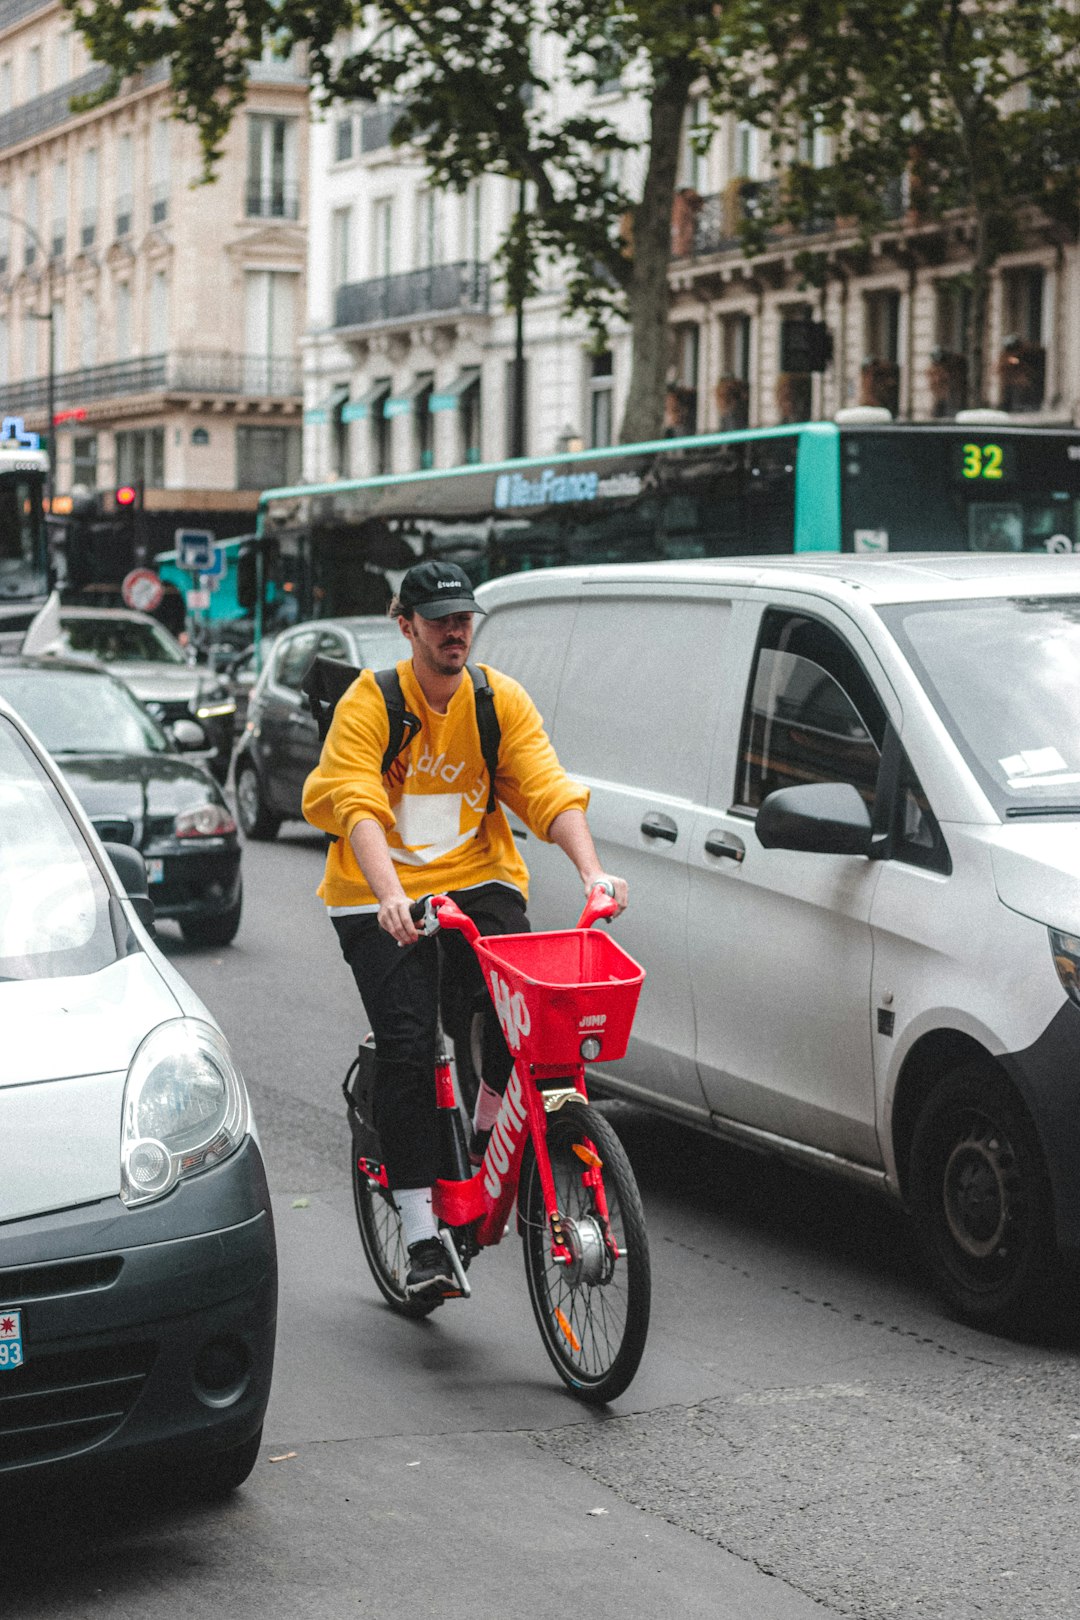 man in yellow polo shirt riding red and white bicycle on road during daytime